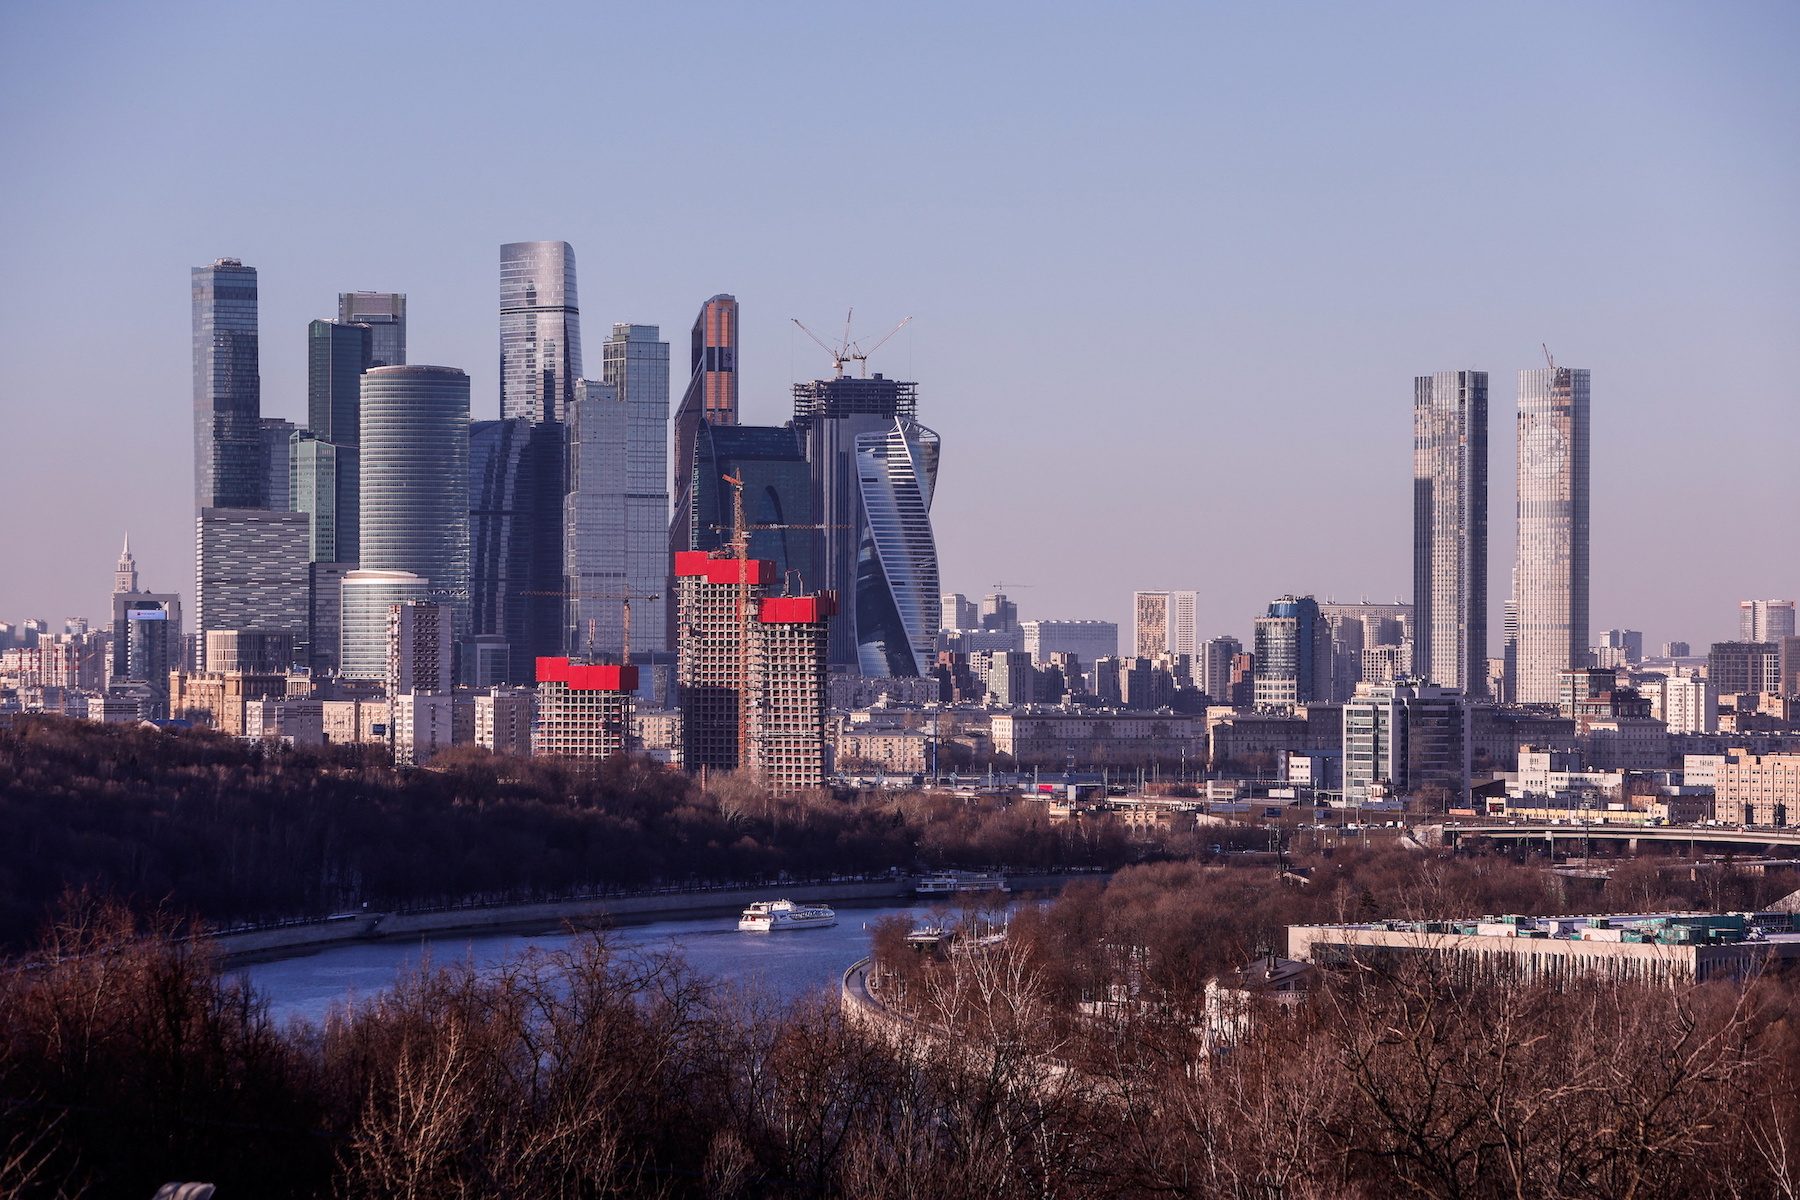 S&P cuts Russia’s rating to CC on debt default risk